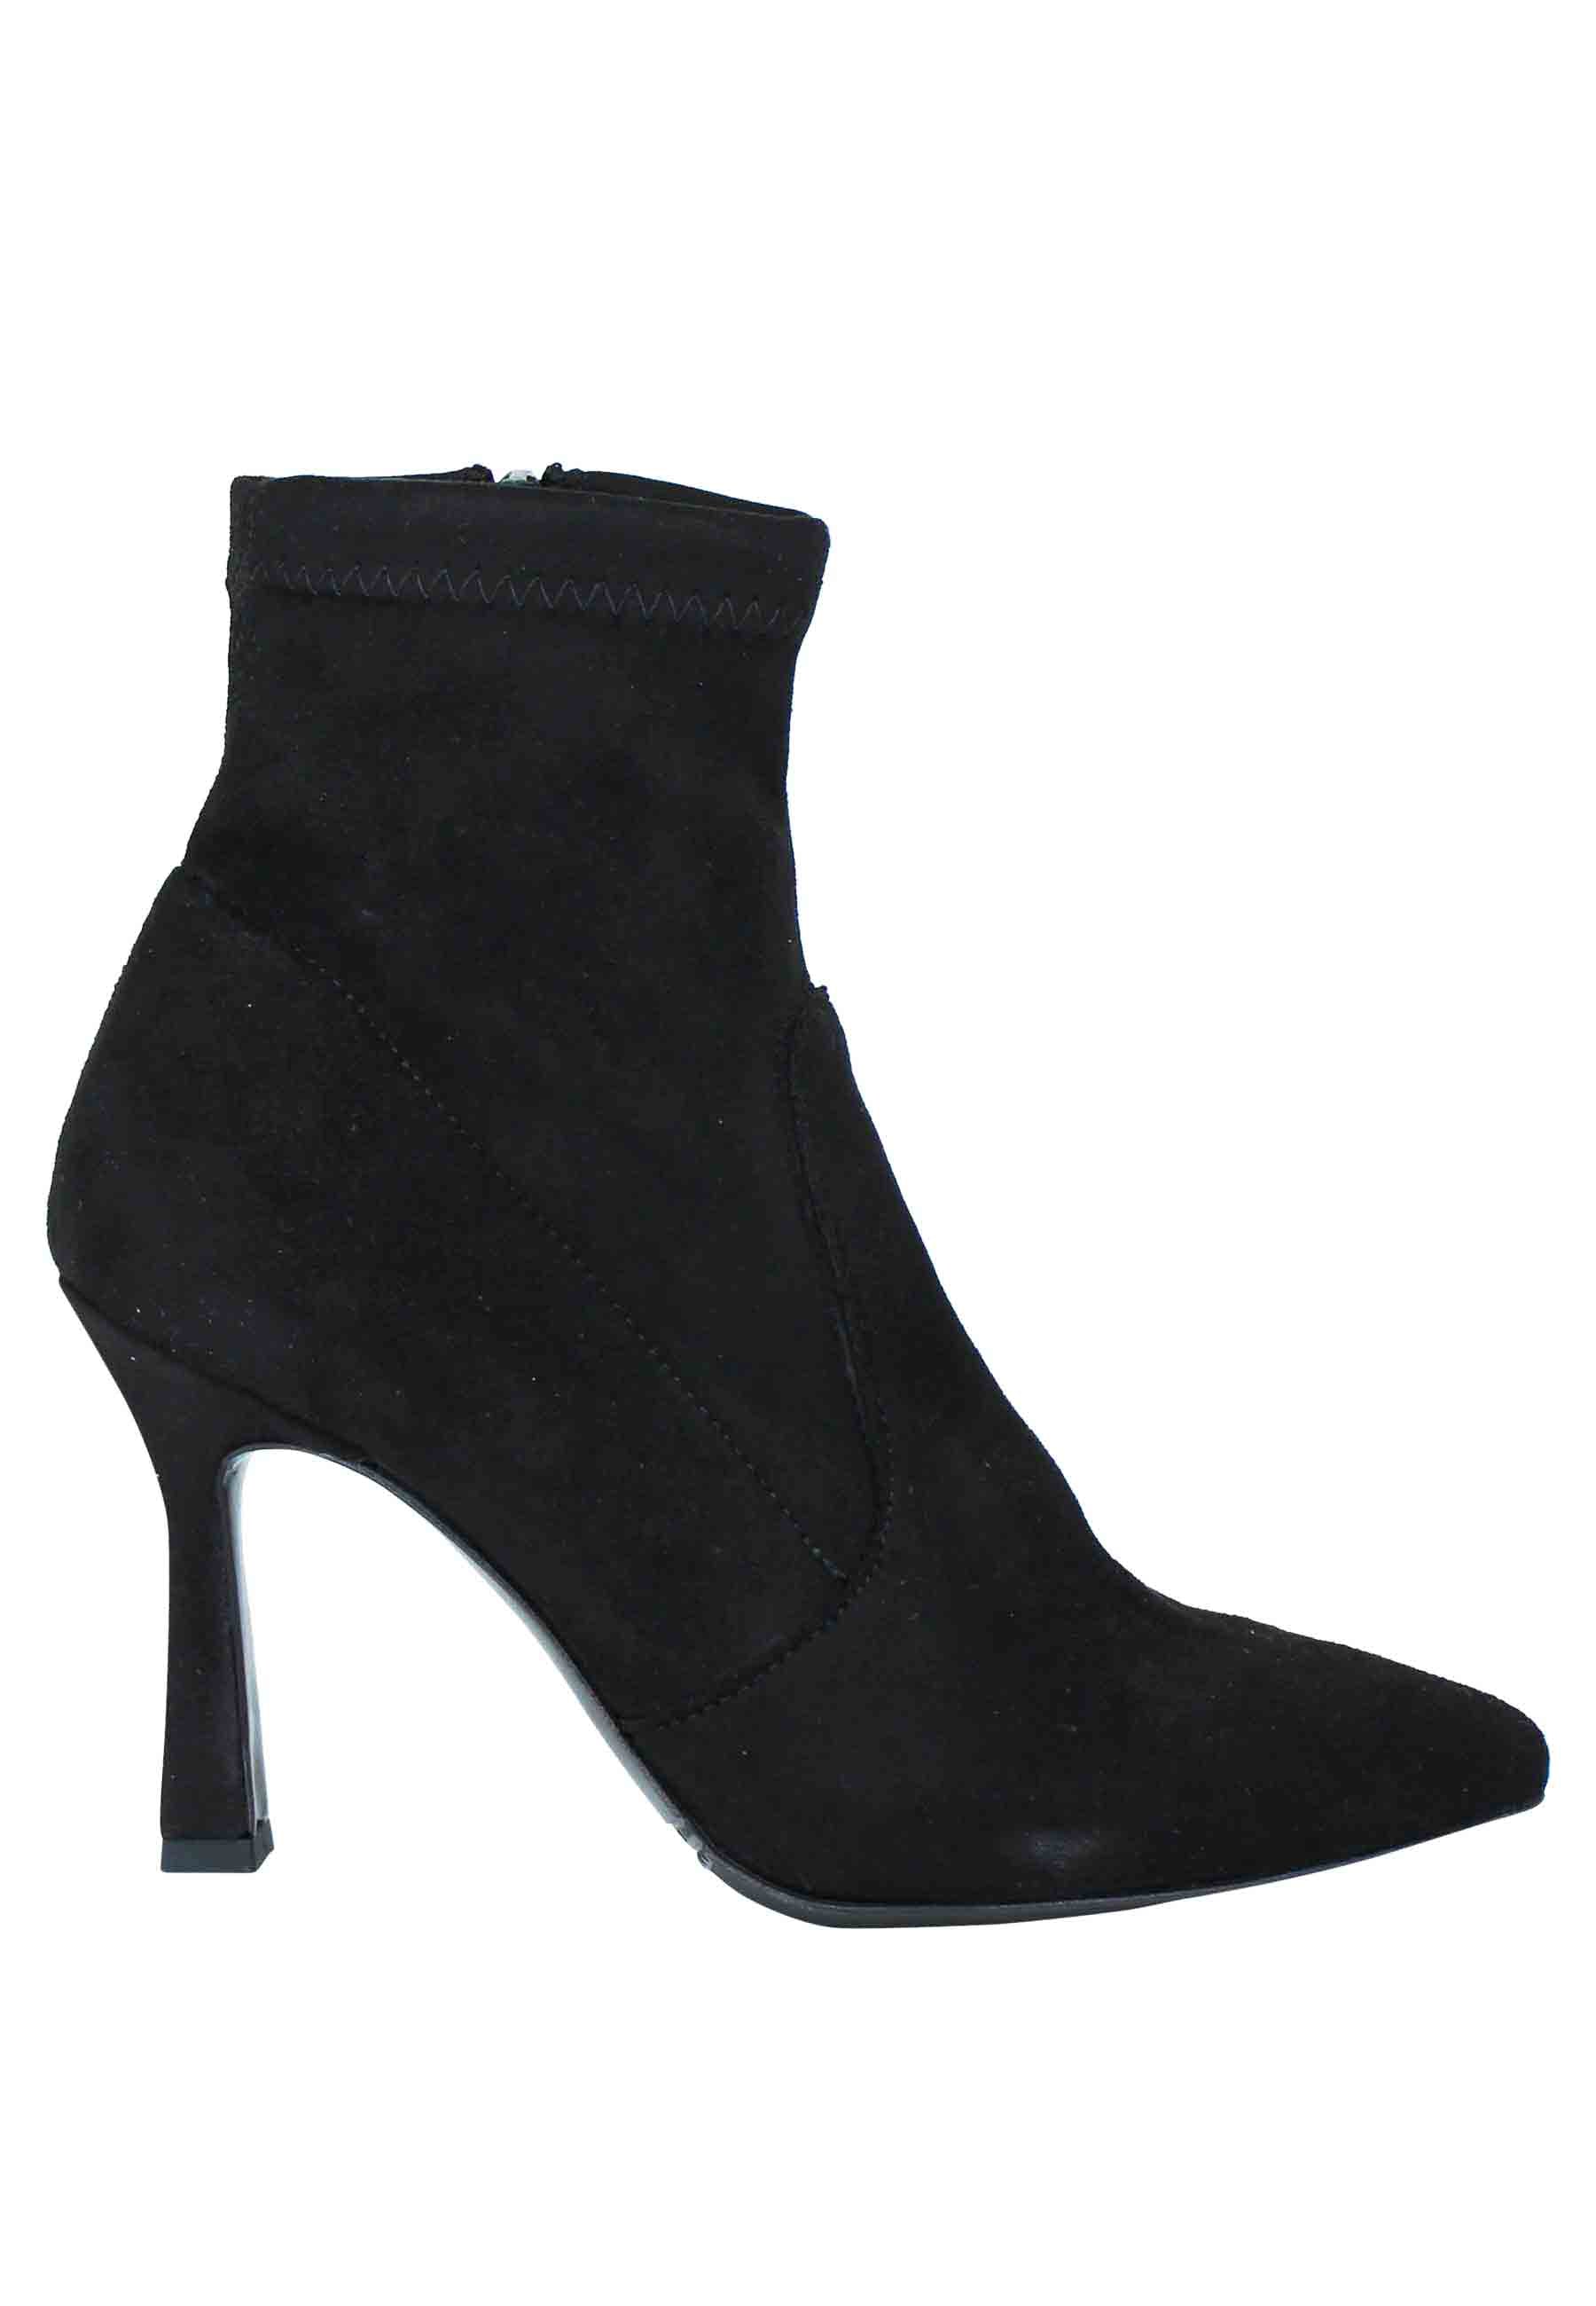 Women's ankle boots in black stretch suede with pointed toe and high heel